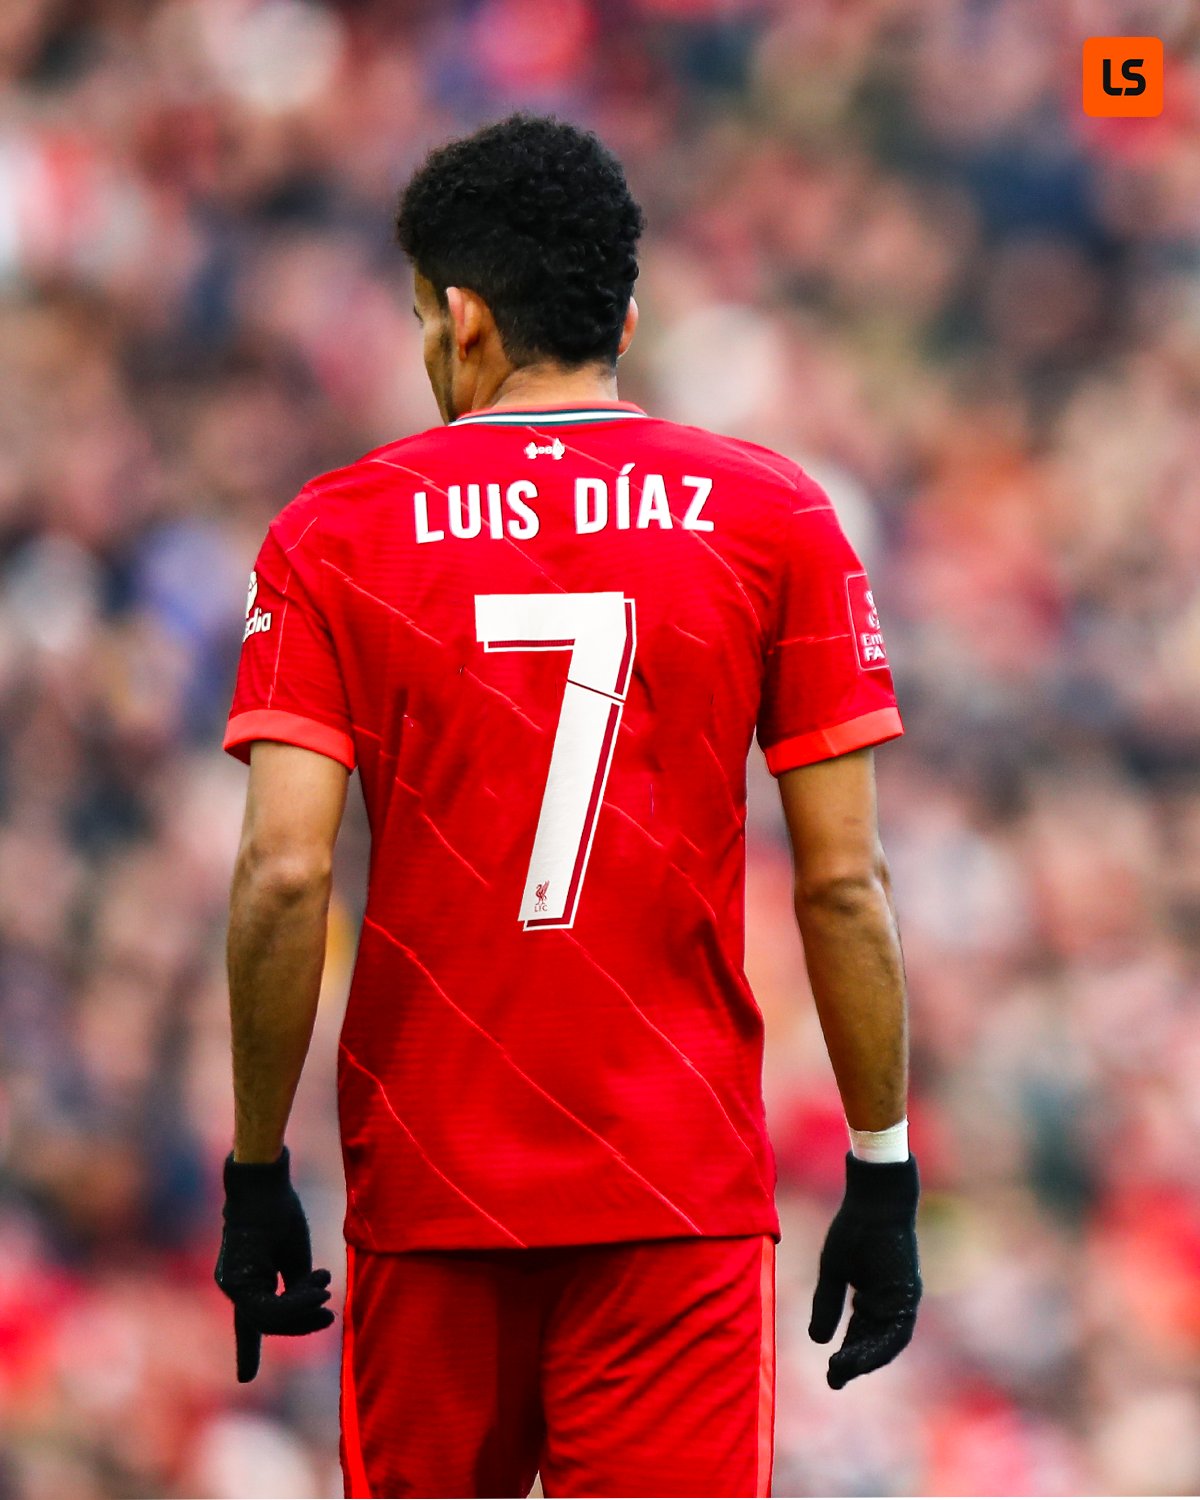 LiveScore on X: "Liverpool announce that Luis Diaz will wear the iconic  number 7 next season  https://t.co/9I20yC3ph0" / X